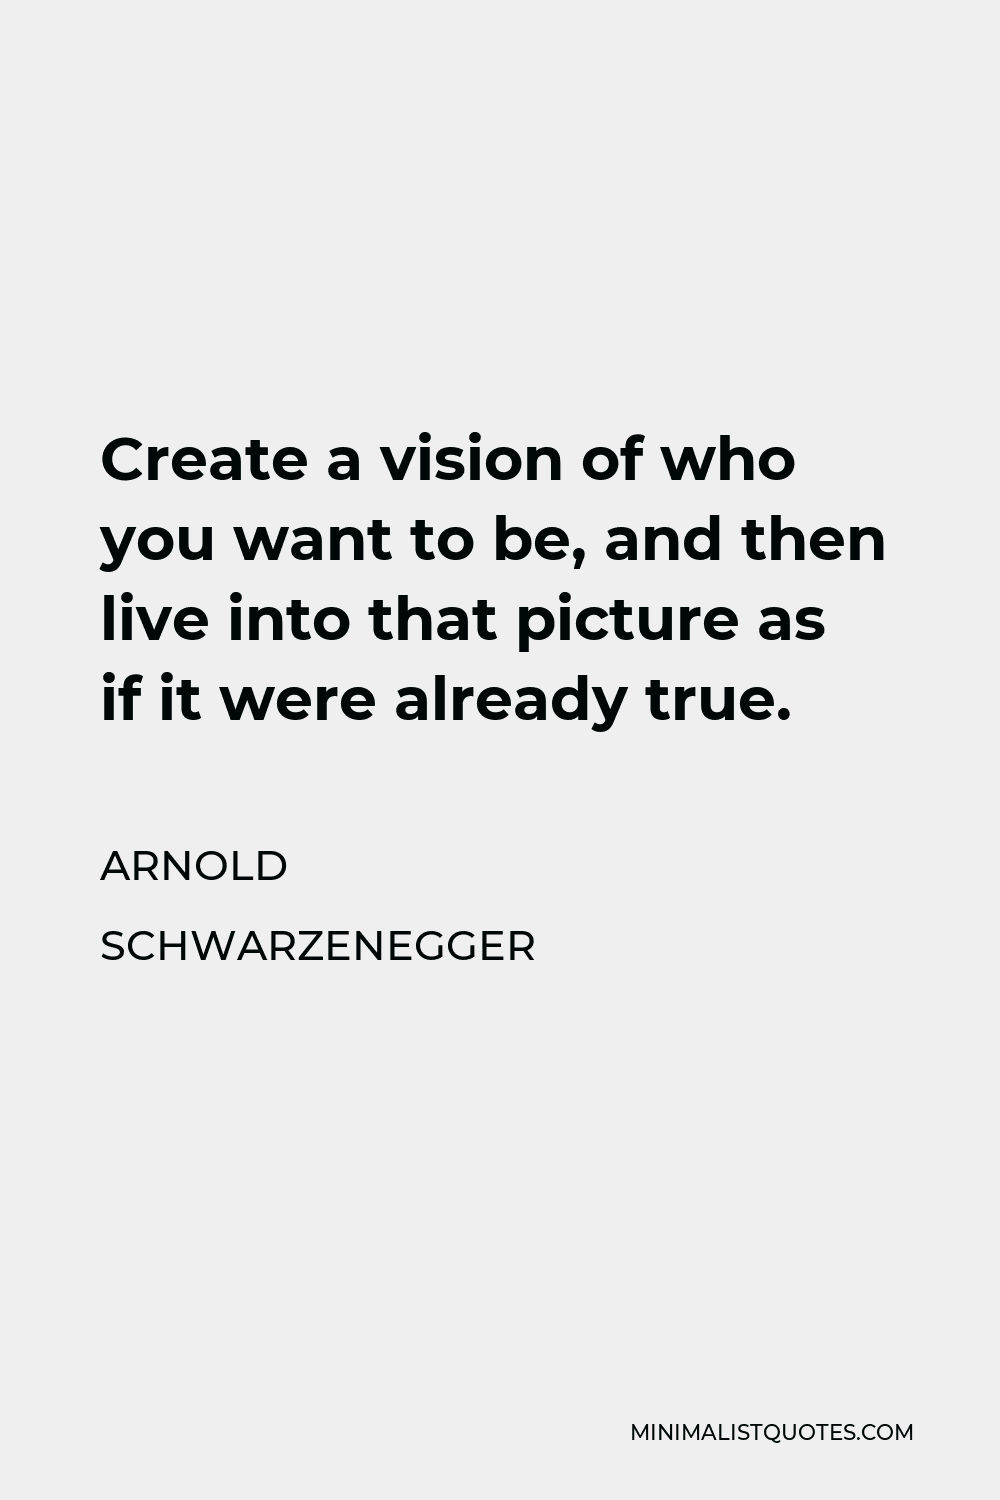 Arnold Schwarzenegger Quote - Create a vision of who you want to be, and then live into that picture as if it were already true.